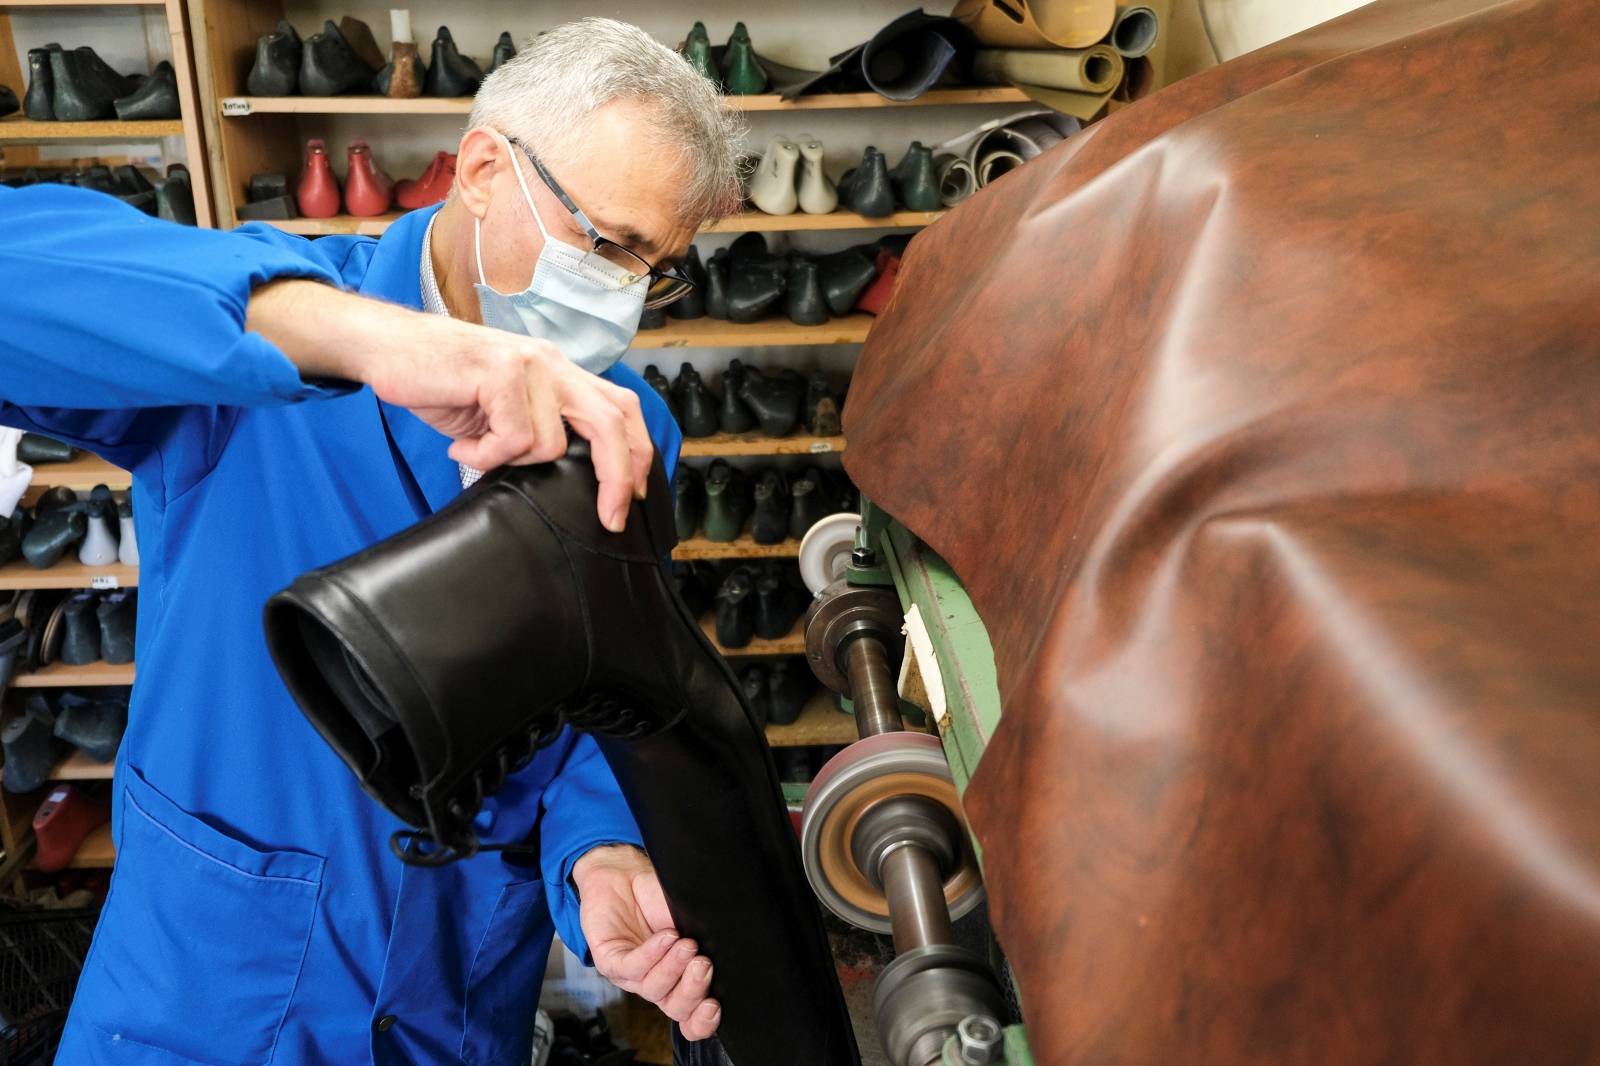 Romanian cobbler Grigore Lup polishes the soles of a pair of oversized winter boots while working on them